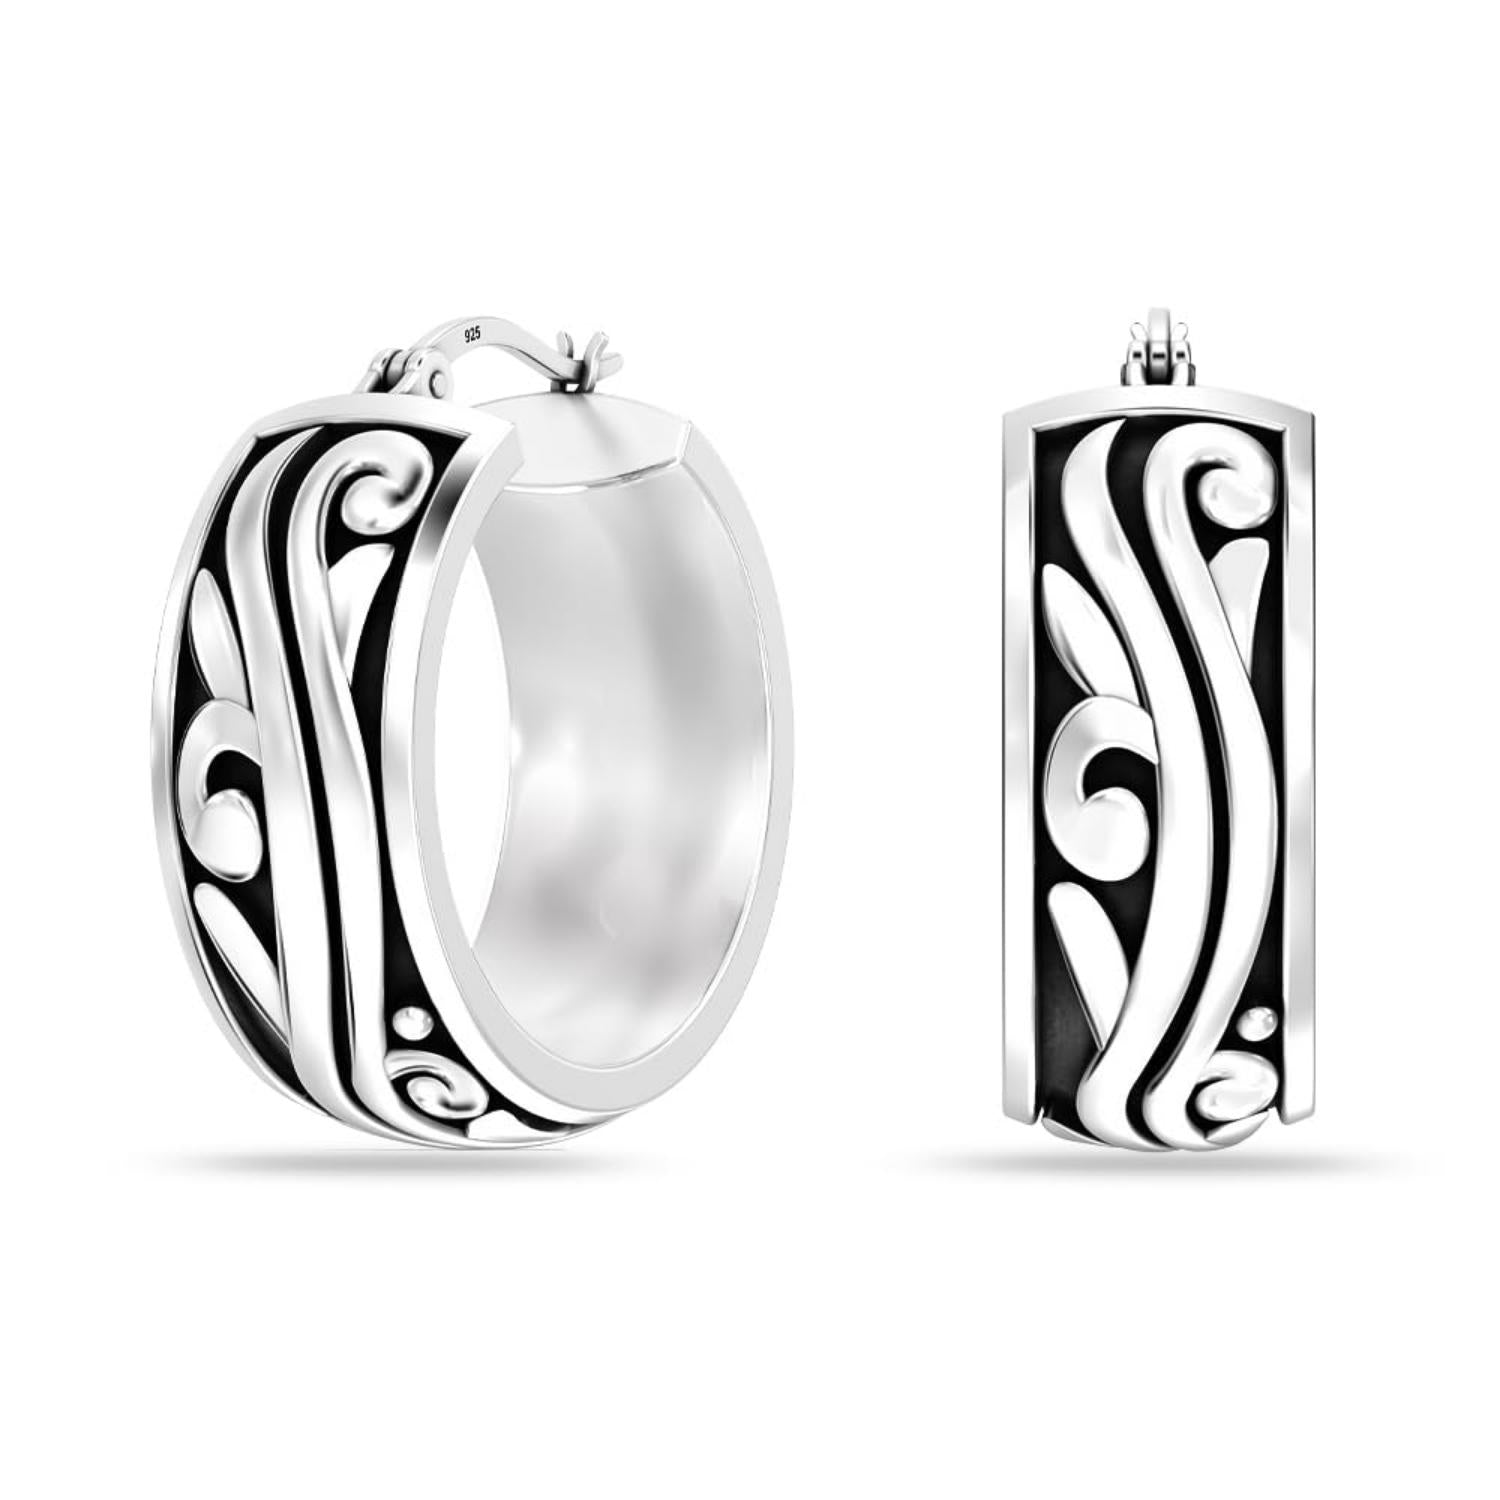 925 Sterling Silver Antique Waved Filigree Lightweight Bali Style Chunky SMALL Click-Top Hoop Earrings for Women